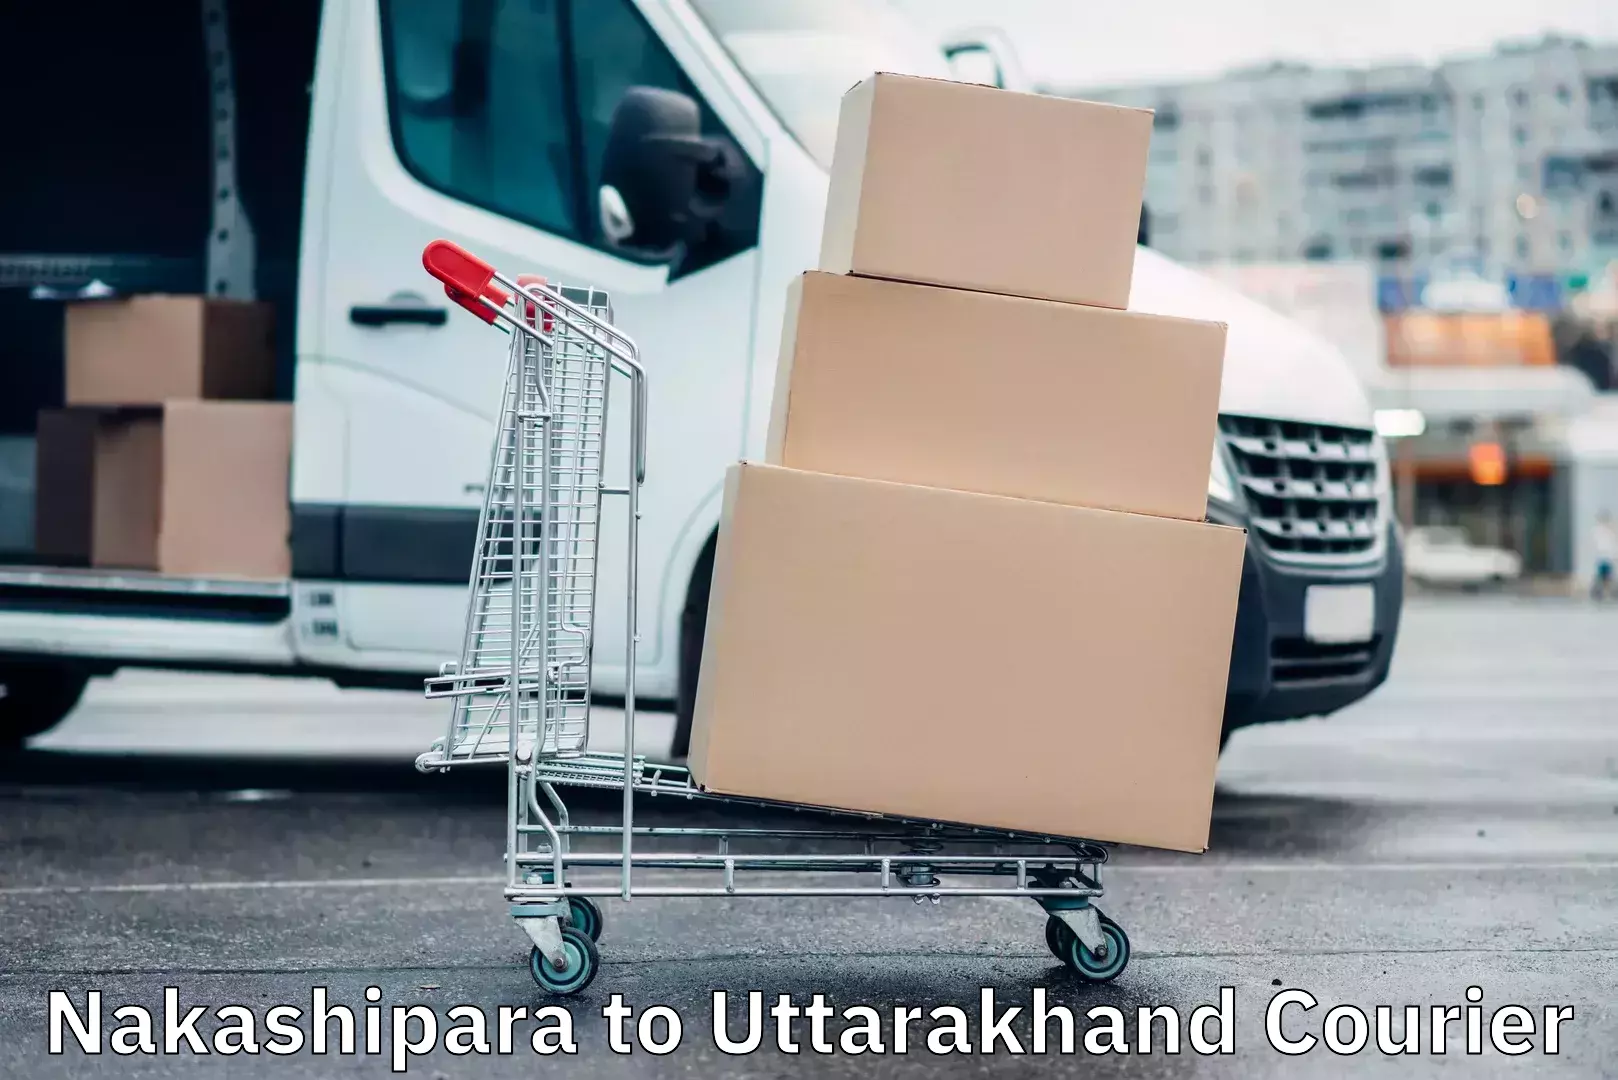 Courier service booking in Nakashipara to Uttarakhand